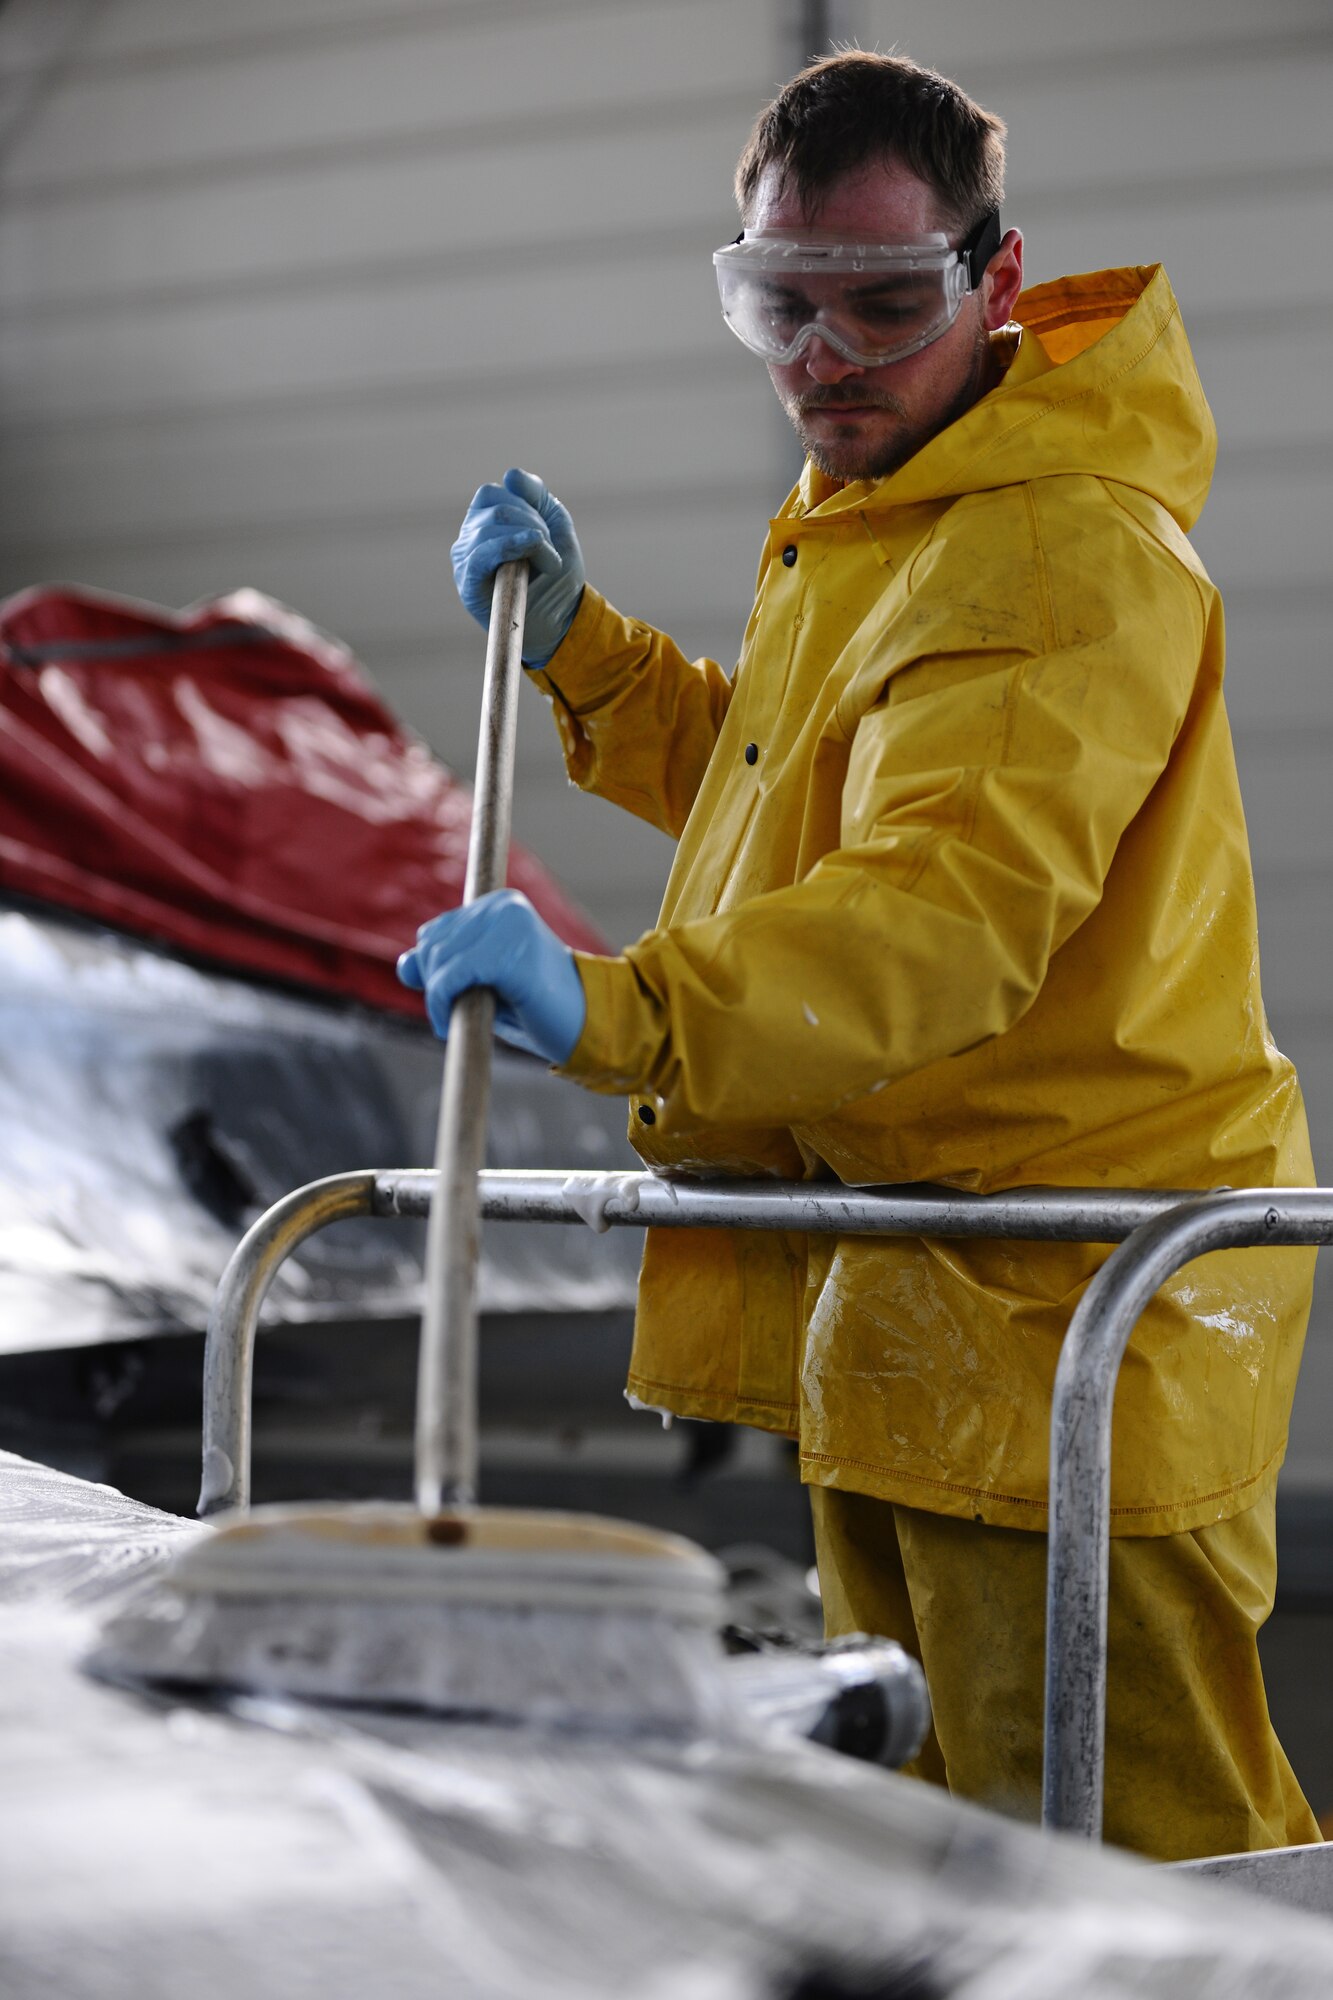 SPANGDAHLEM AIR BASE, Germany – Dustin Bowers, 52nd Equipment Maintenance Squadron Fabrication Flight corrosion control civilian contractor, cleans the wing of an F-16 Fighting Falcon with a brush in Hangar 3 here May 11. The fabrication flight contractors wash every 52nd Fighter Wing aircraft twice a year to prevent corrosion and extend the lifespan of the aircraft. (U.S. Air Force photo by Airman 1st Class Matthew B. Fredericks/Released)